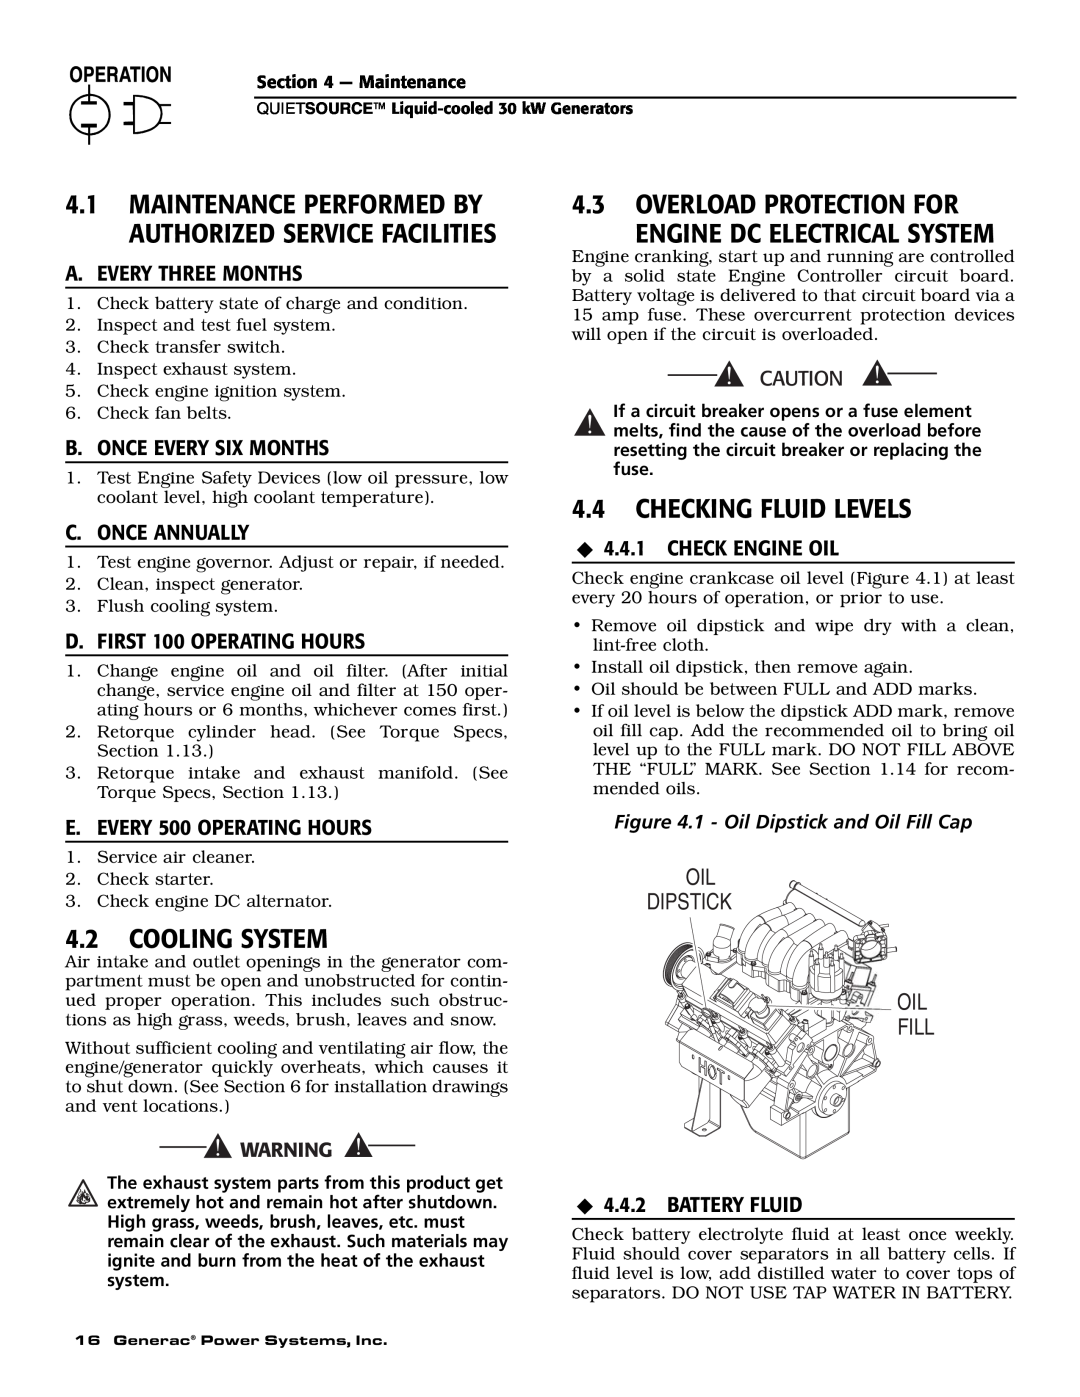 Generac Power Systems 004917-3 4.3OVERLOAD PROTECTION FOR, Engine Dc Electrical System, 4.4CHECKING FLUID LEVELS, Oil Fill 